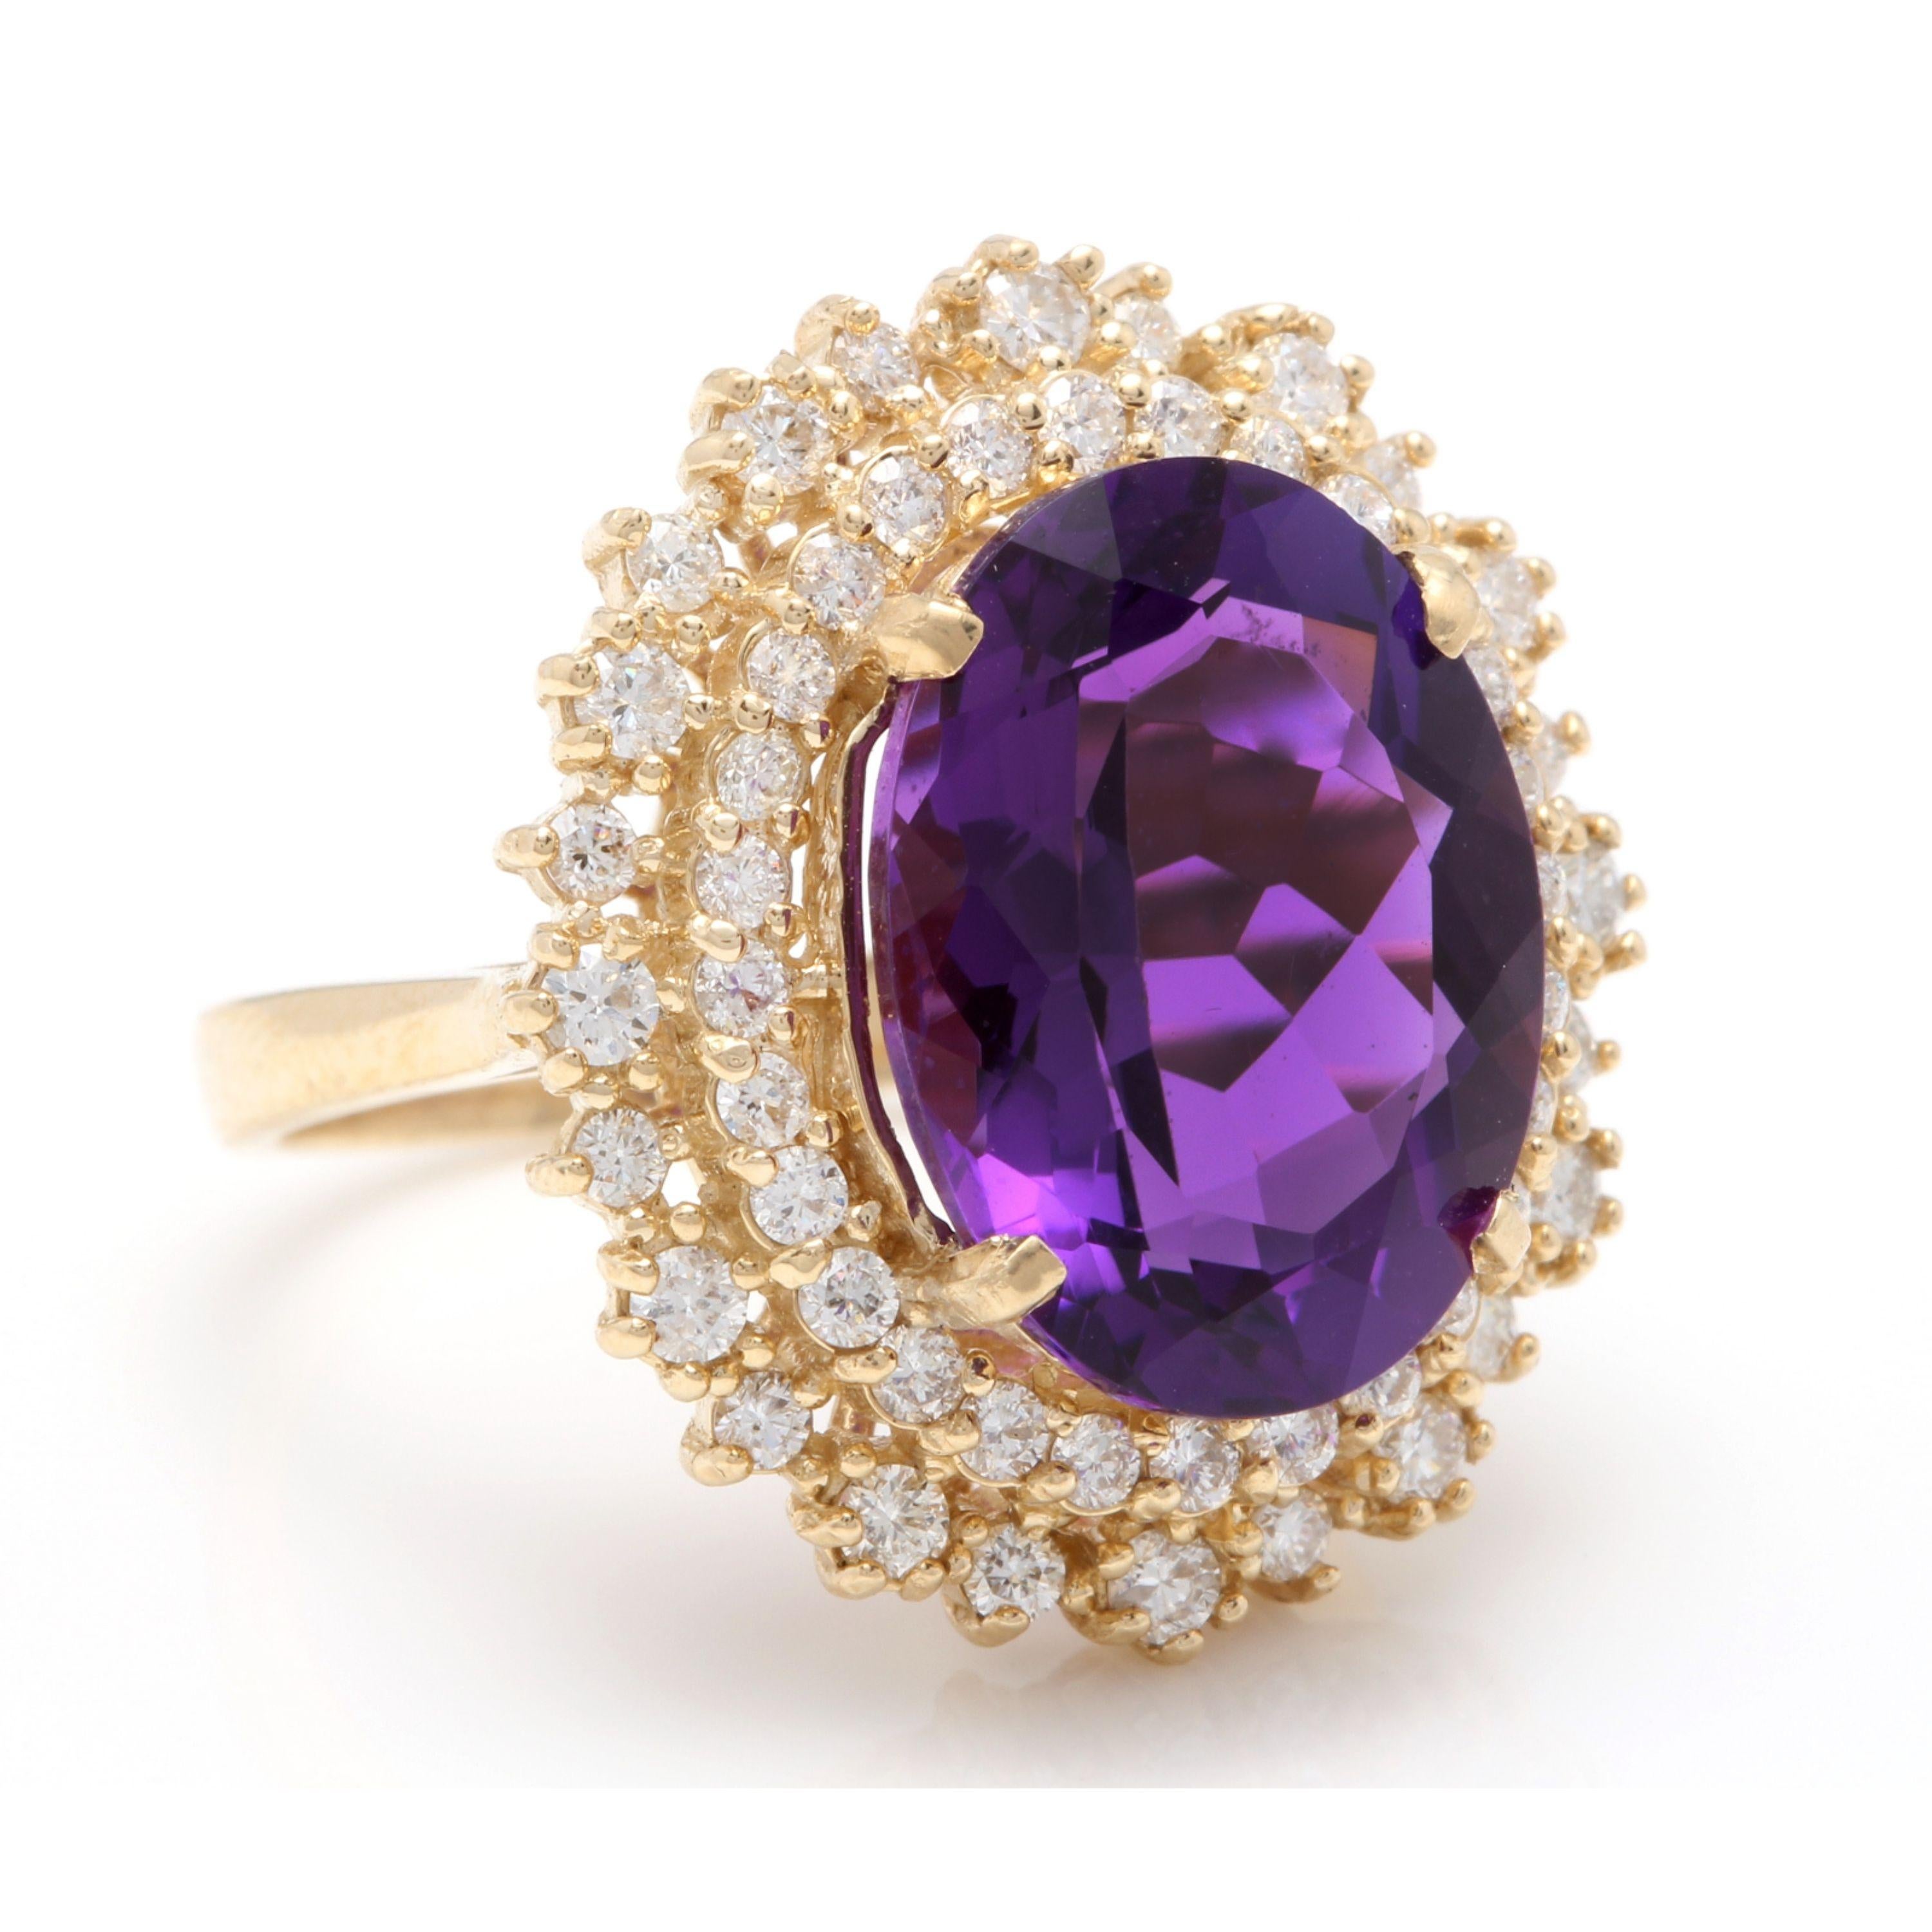 10.40 Carats Natural Impressive Amethyst and Diamond 14K Yellow Gold Ring

Total Natural Amethyst Topaz Weight: Approx. 9.00 Carats

Amethyst Measures: Approx. 16 x 12mm

Natural Round Diamonds Weight: Approx. 1.40 Carats (color G-H / Clarity